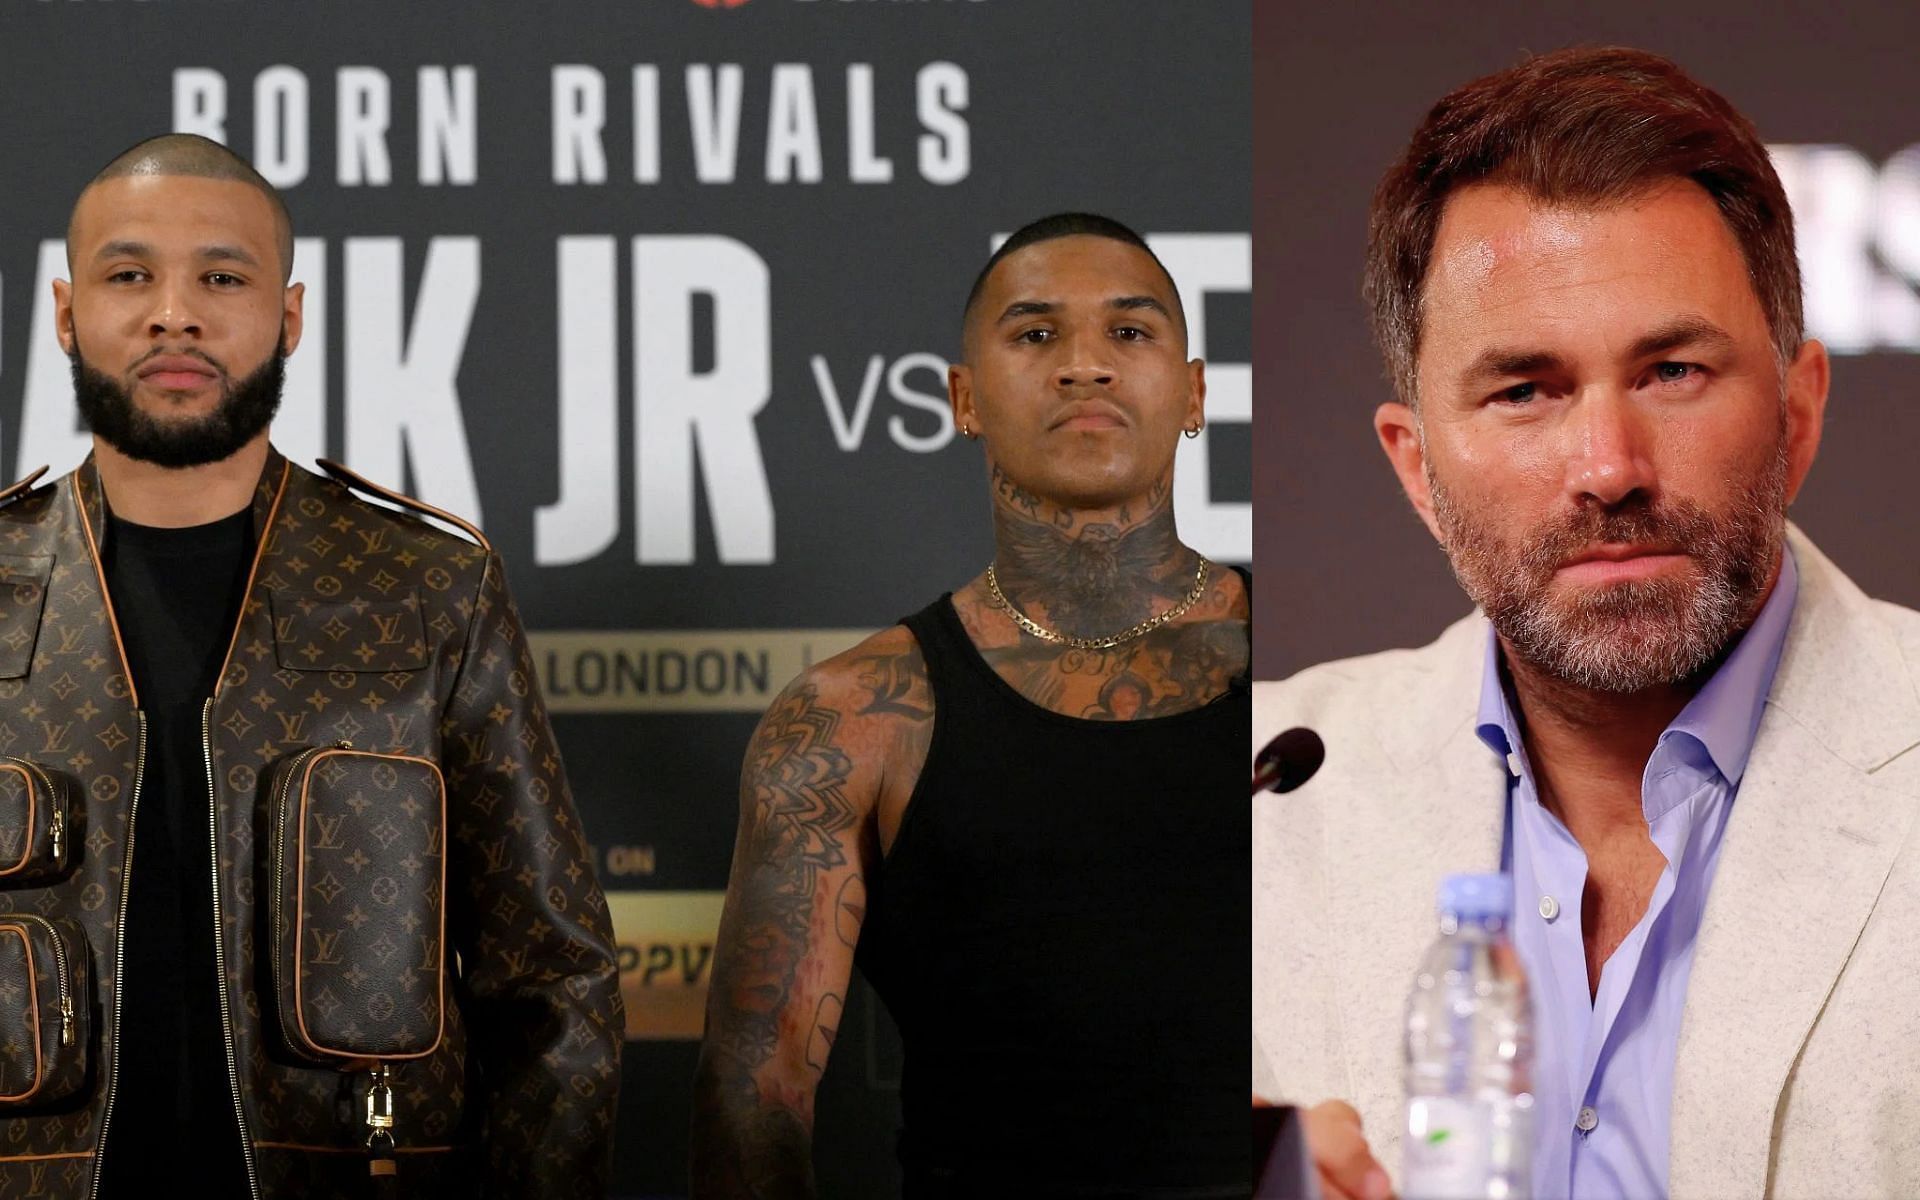 Eddie Hearn (right) questions Chris Eubank Jr. (left) for not wanting to face Conor Benn (middle) [Images Courtesy: @GettyImages]